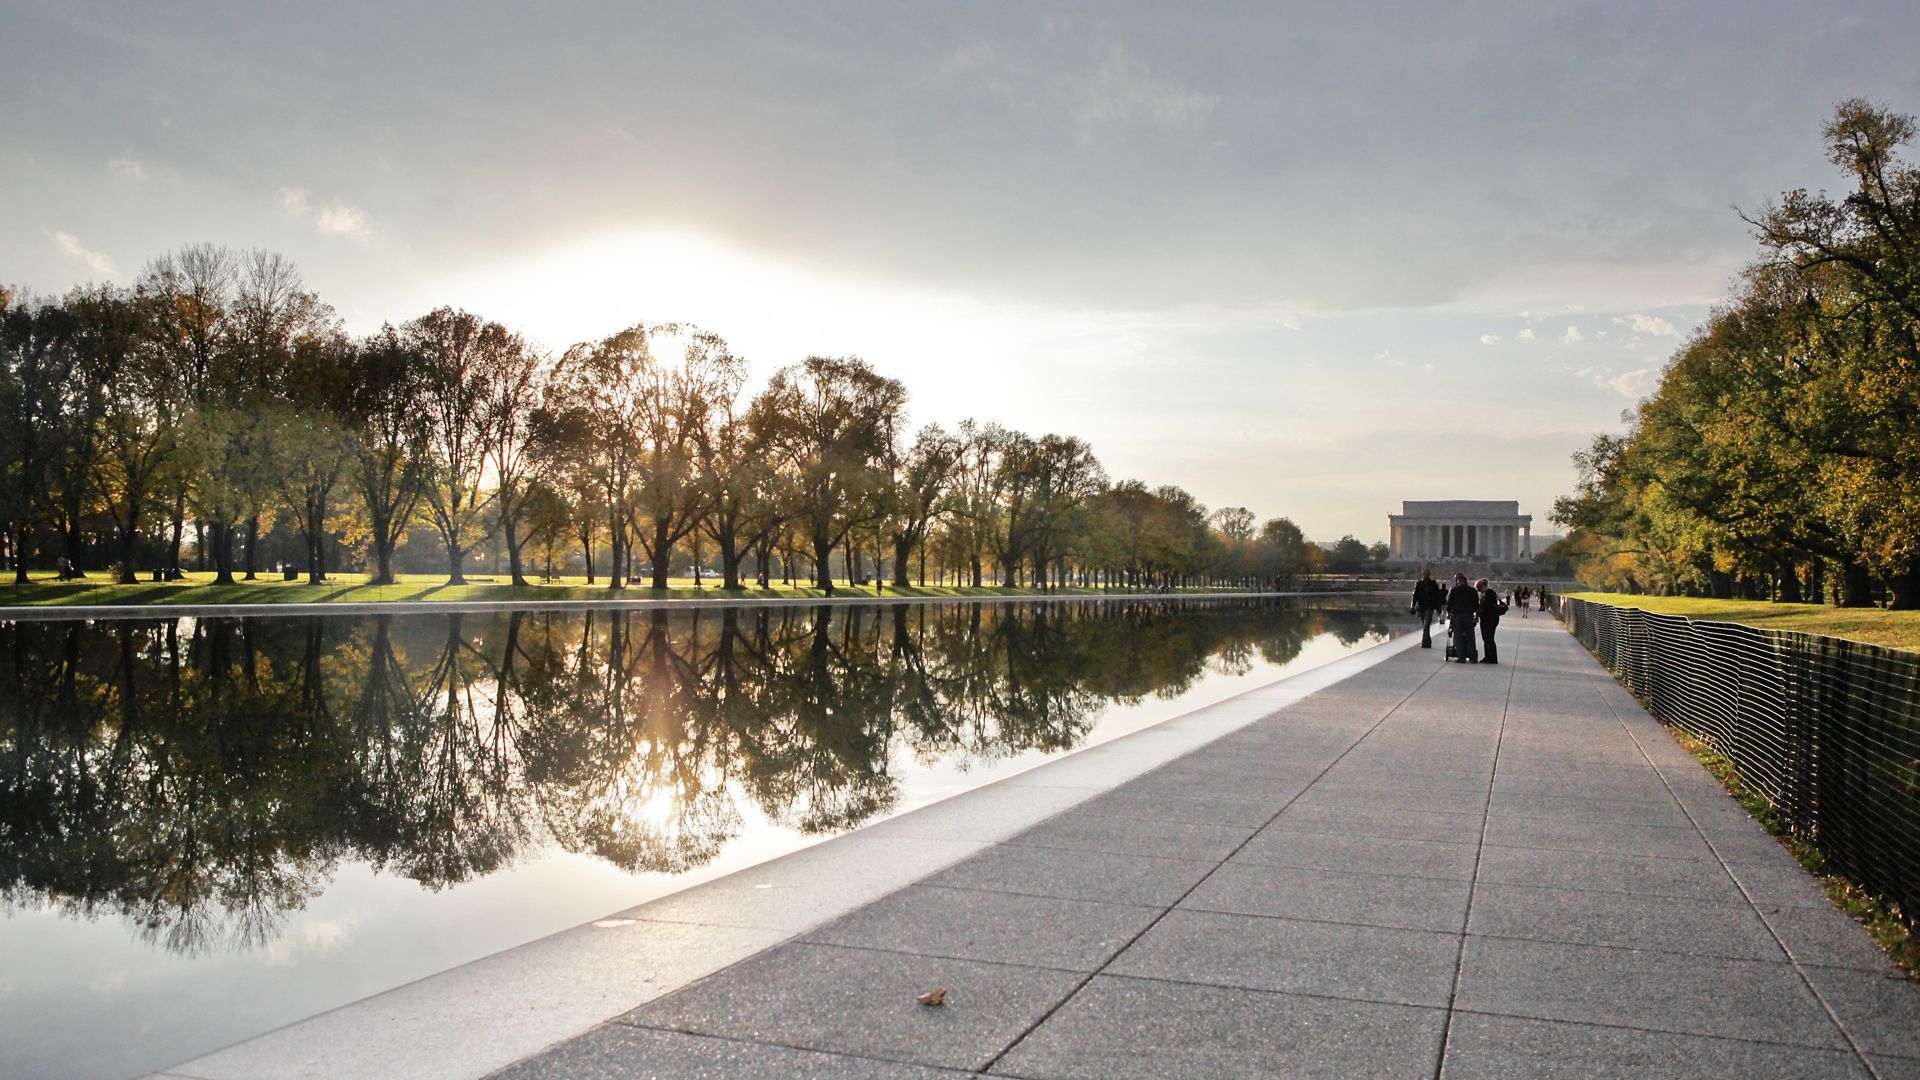 Lincoln Memorial Reflecting Pool in Washington D.C. made with Sika Watertight Concrete System